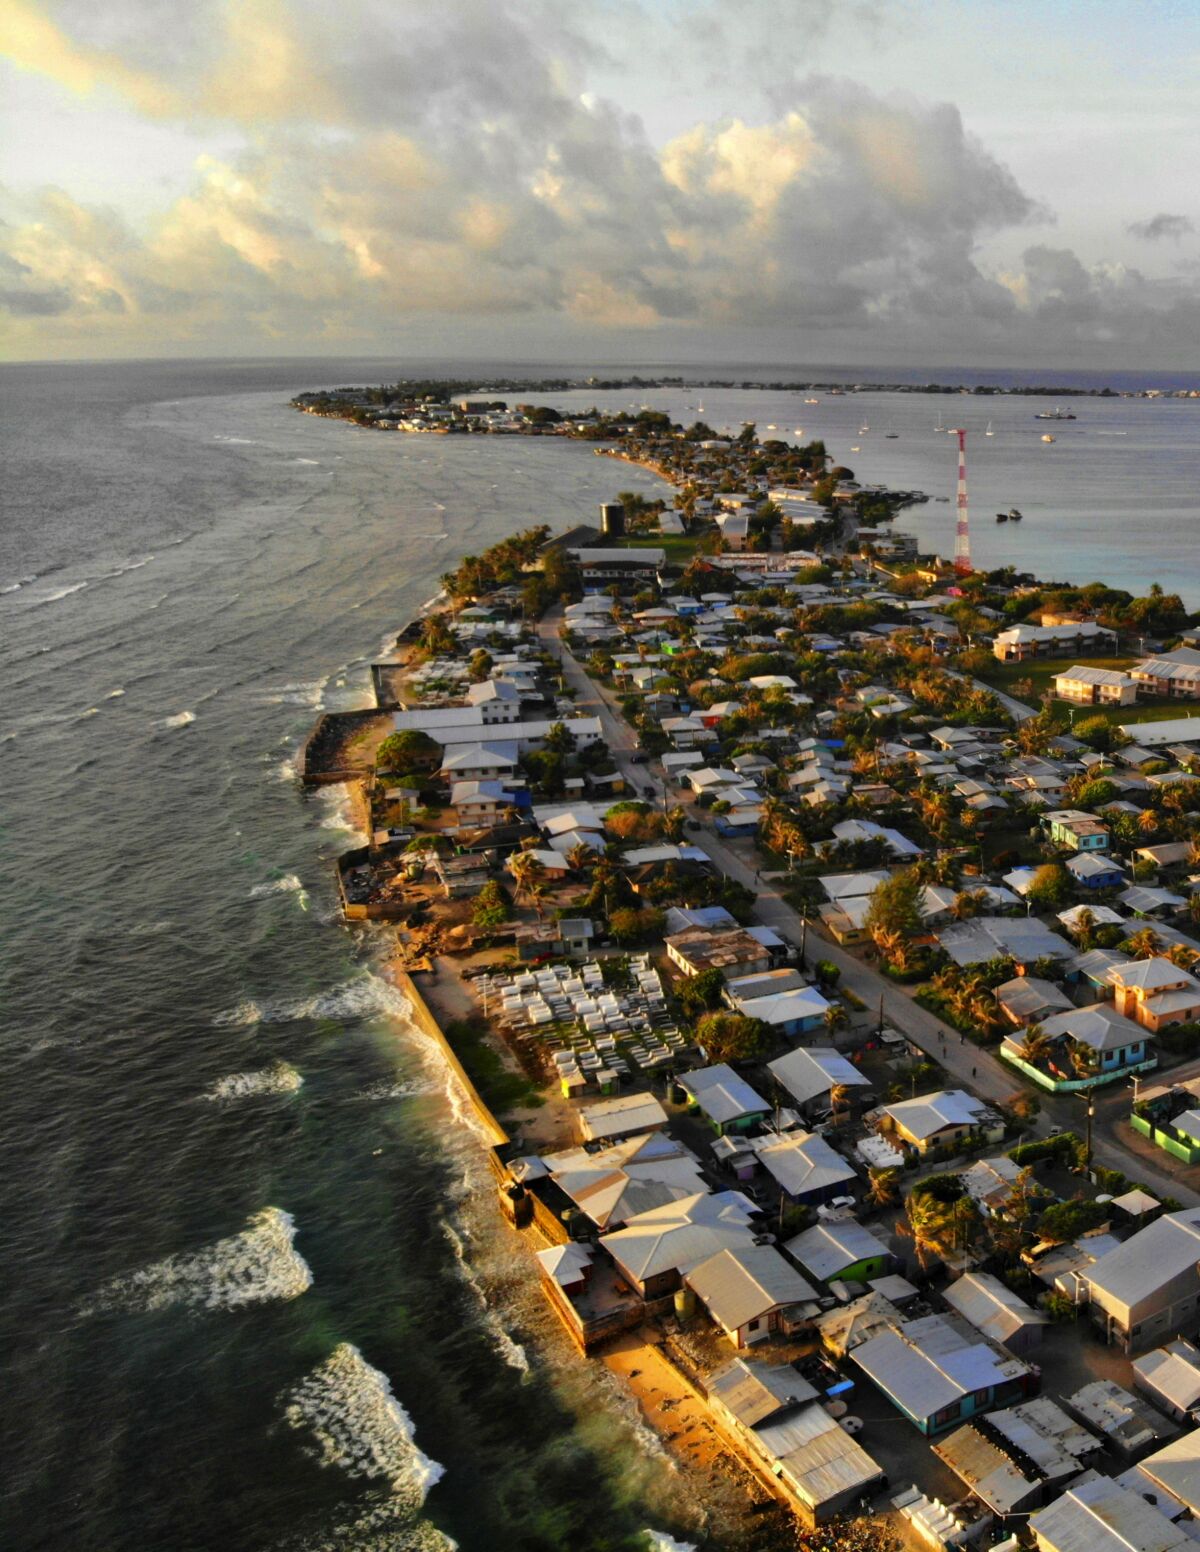 Homes pack an atoll in the Marshall Islands.